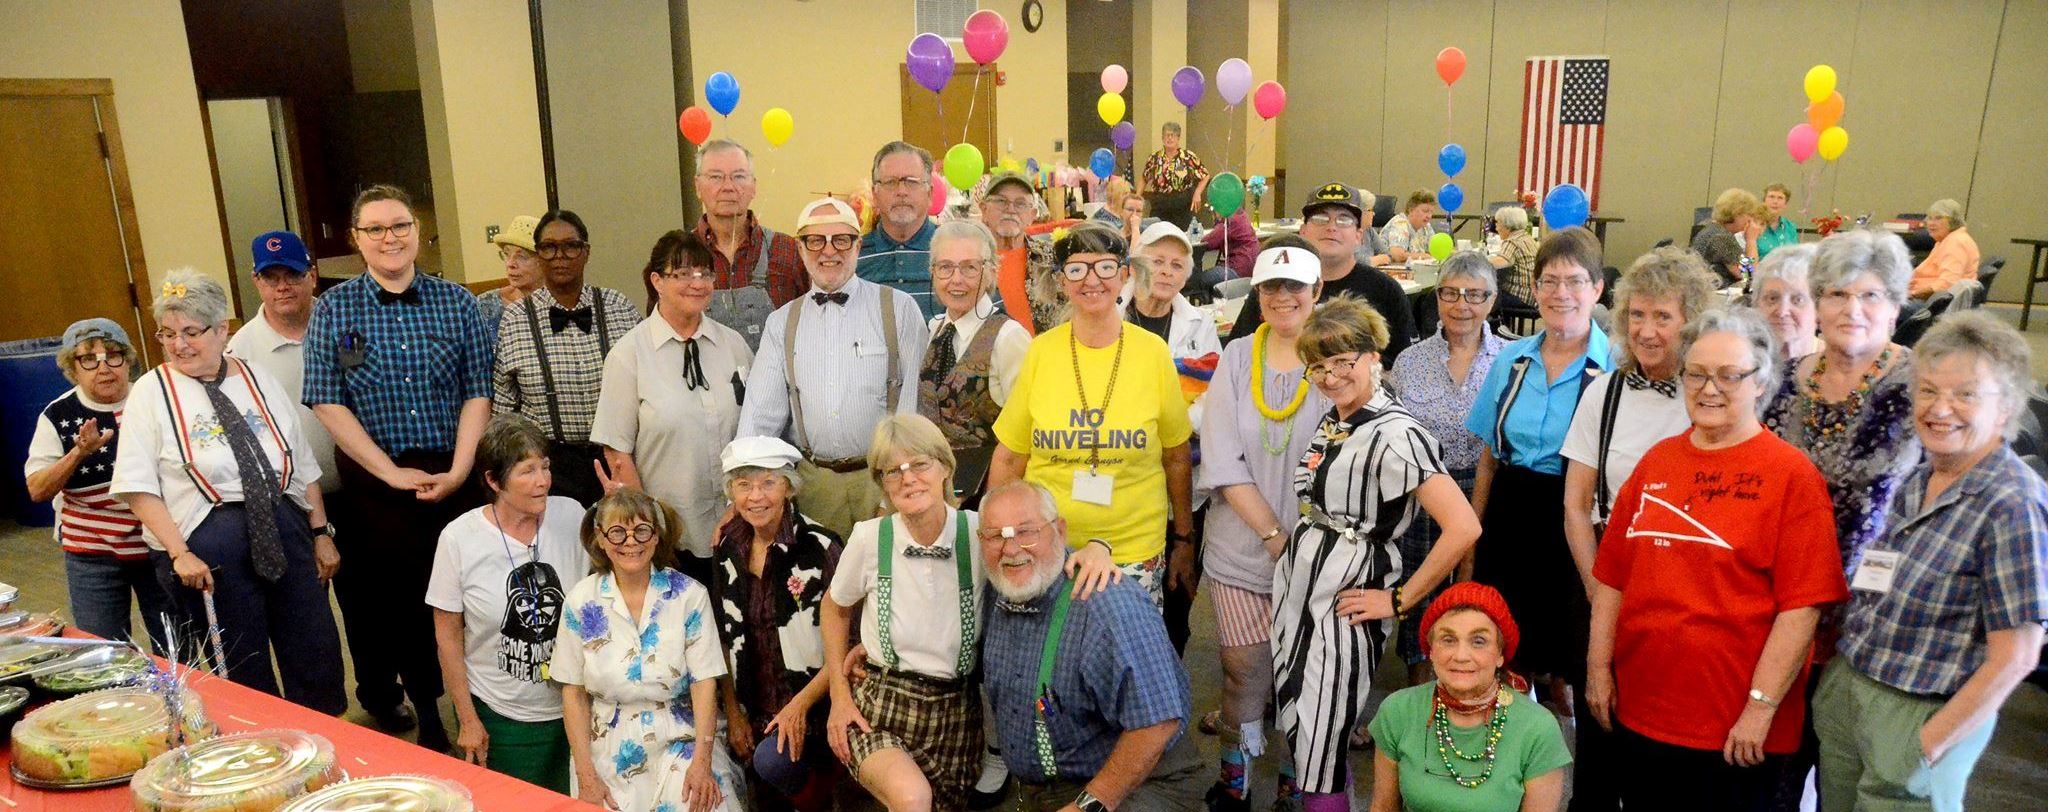 Group photo of Cottonwood Public Library volunteers.